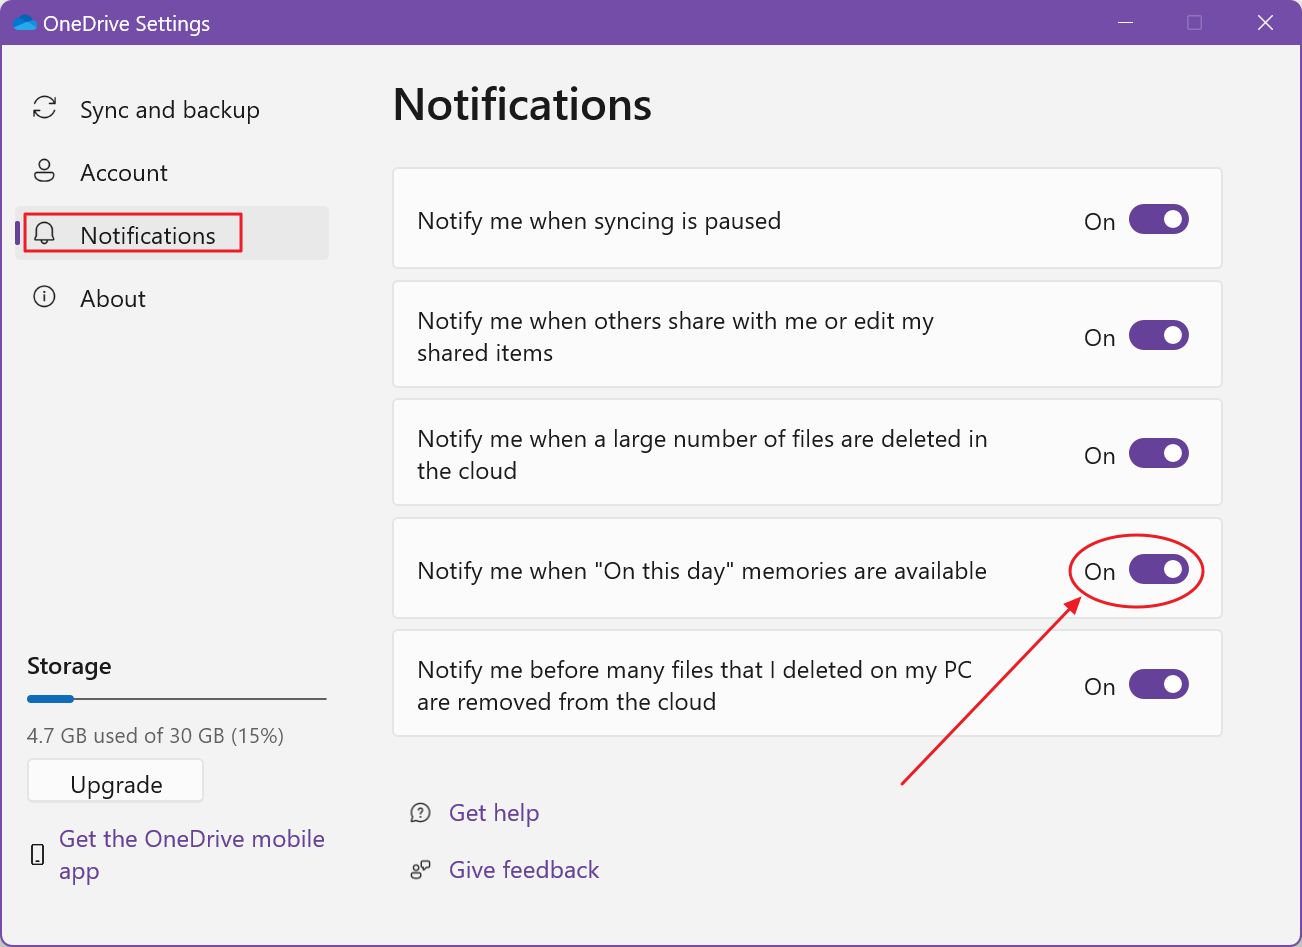 onedrive desktop app settings notifications on this day